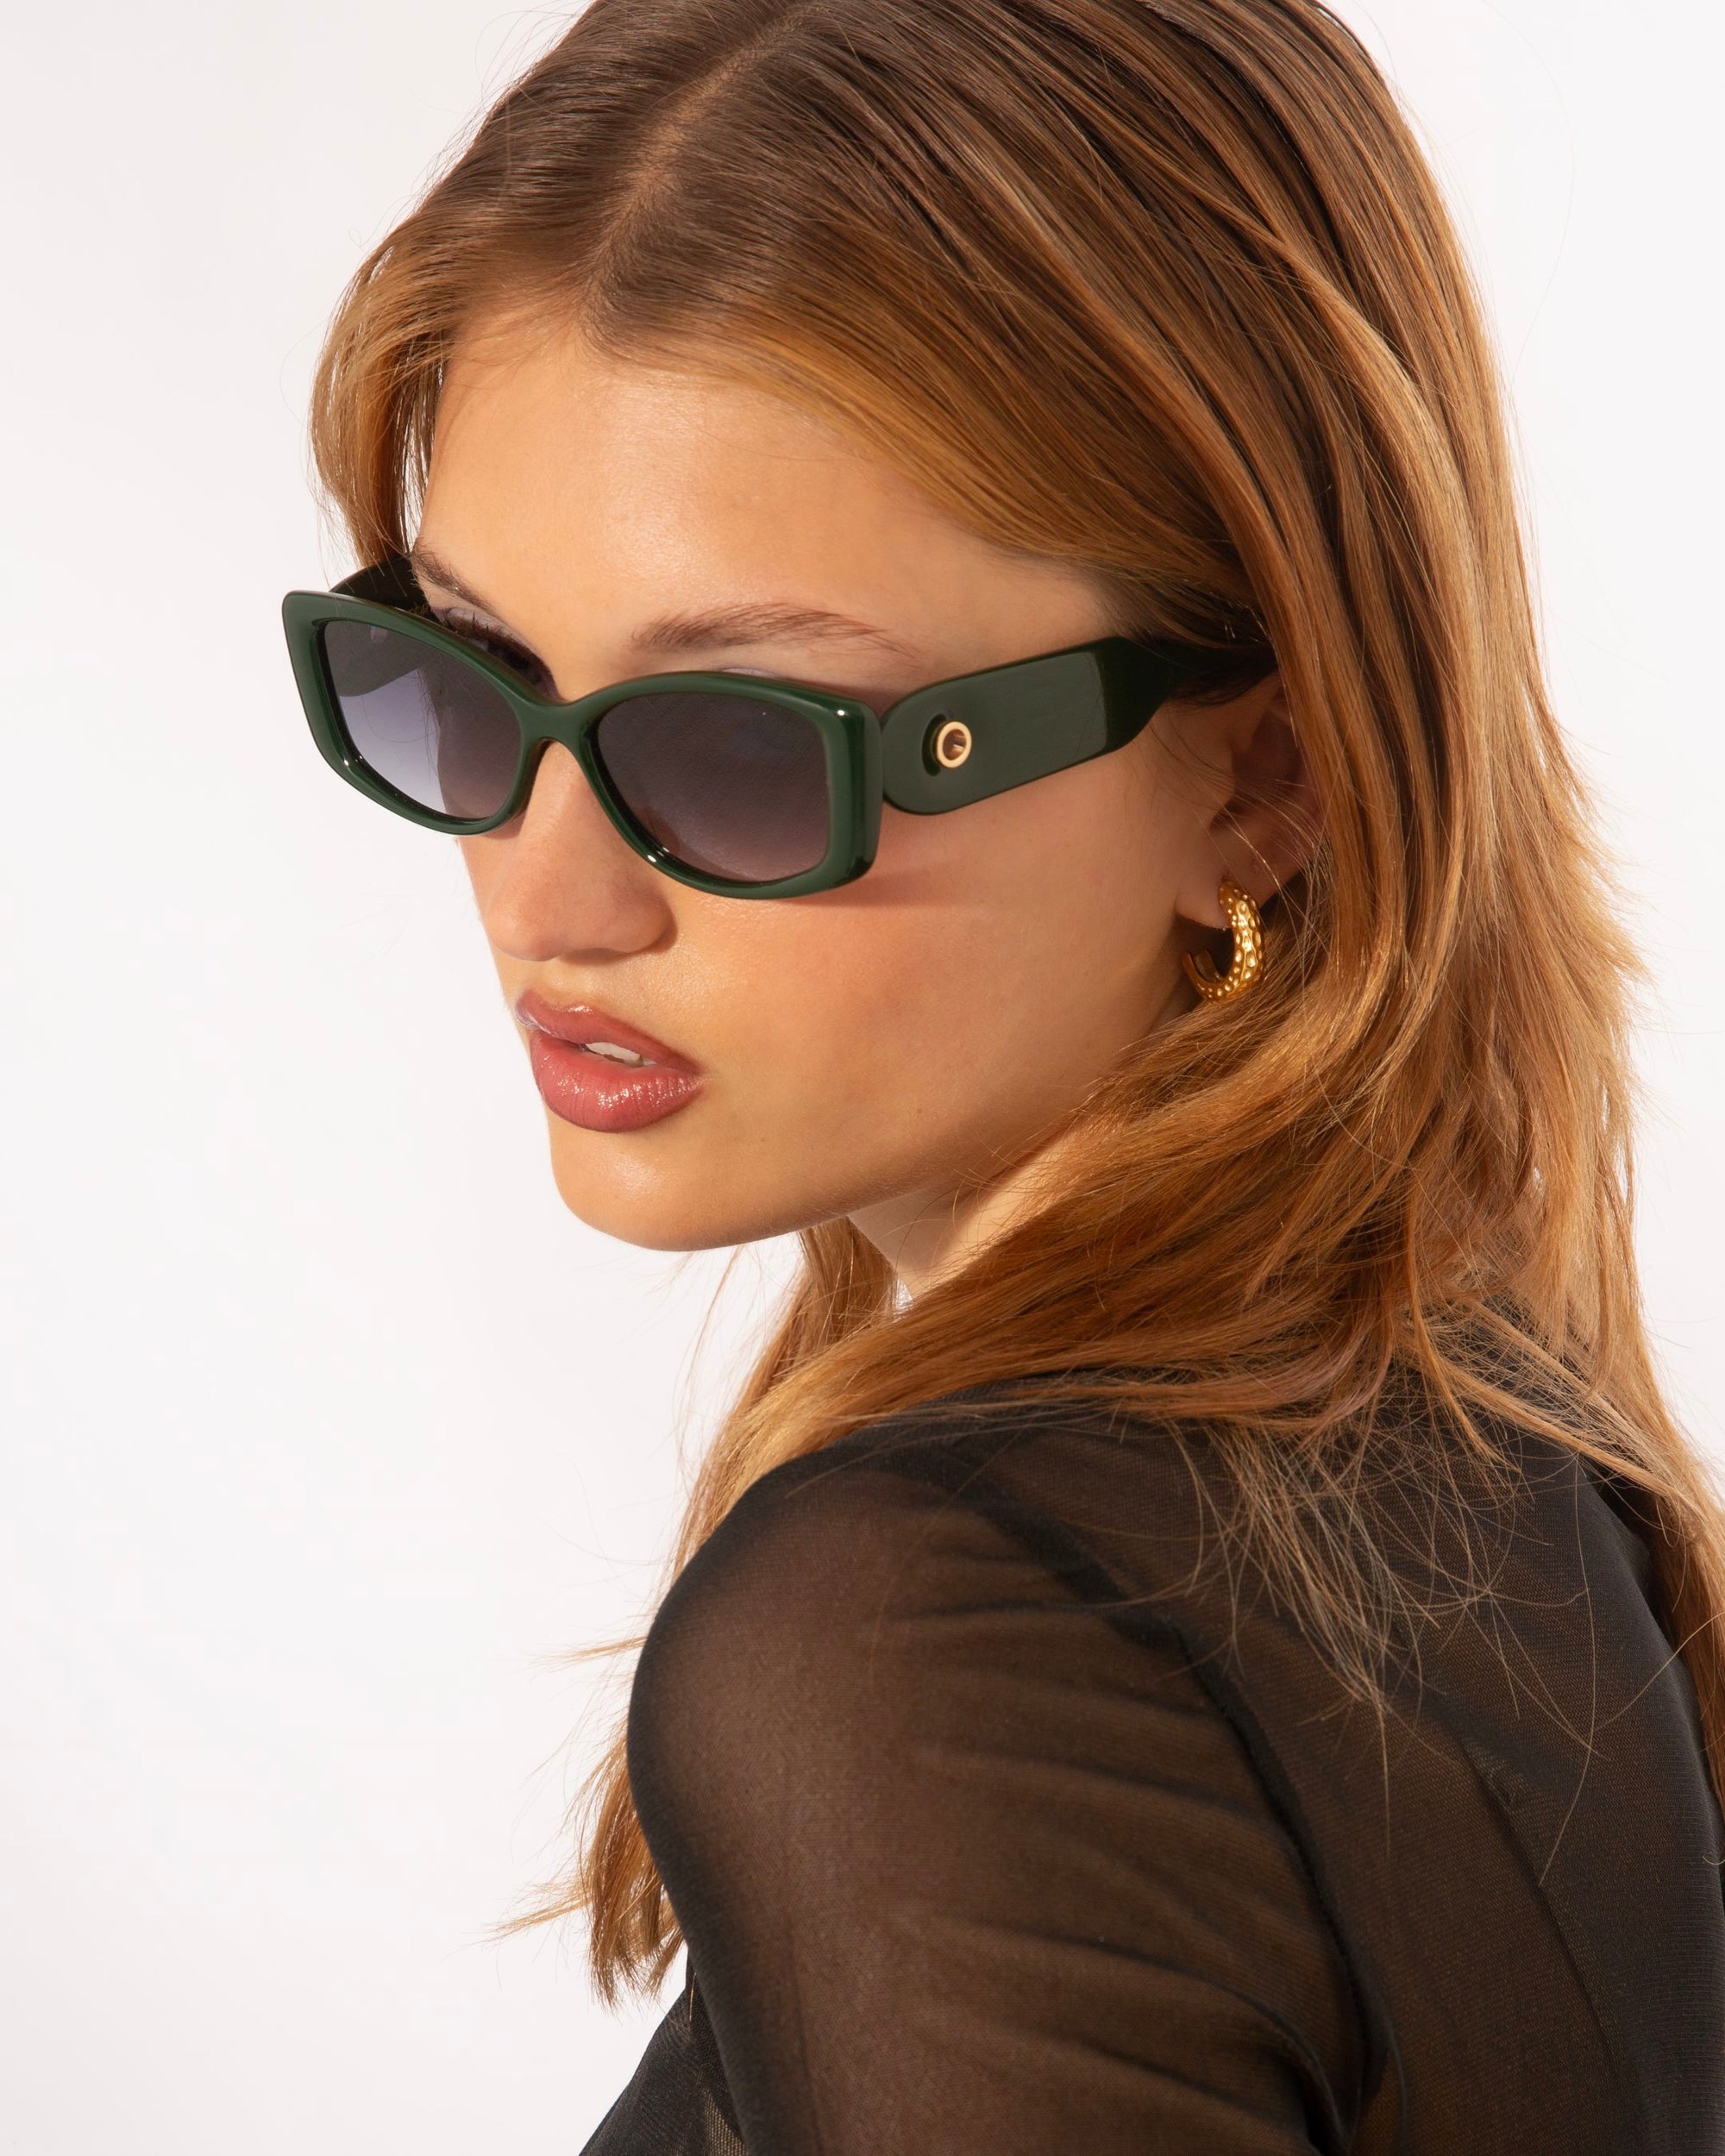 A woman with long light brown hair wearing dark green For Art&#39;s Sake® Mene sunglasses with a Cat-Eye silhouette and gold hoop earrings. She is dressed in a sheer black top and is looking to her left. The background is plain white.